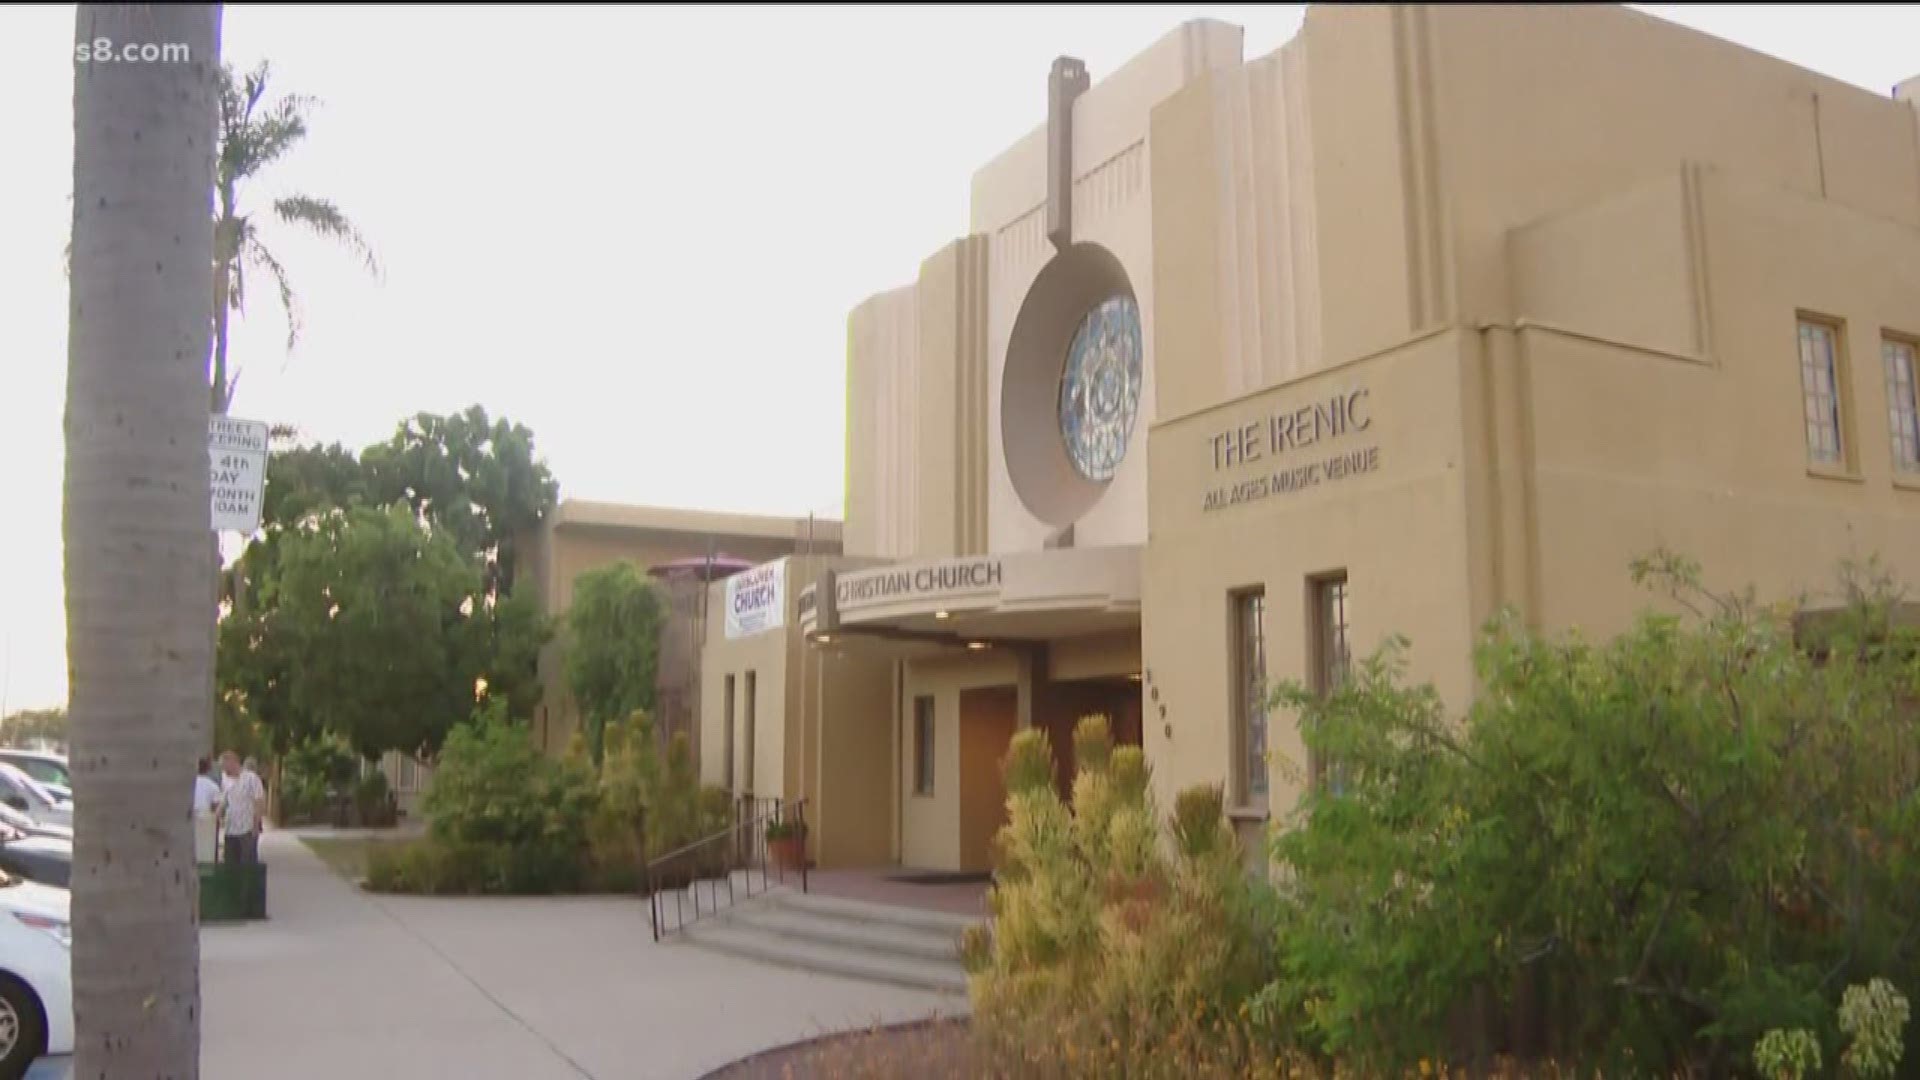 A youth homeless shelter and music venue housed at a San Diego church are being shut down by the City of San Diego. The city said the Mission Gathering Christian Church violated dozens of zoning codes. News 8 Richard Allyn reports from North Park with more on how the church is fighting for its survival.